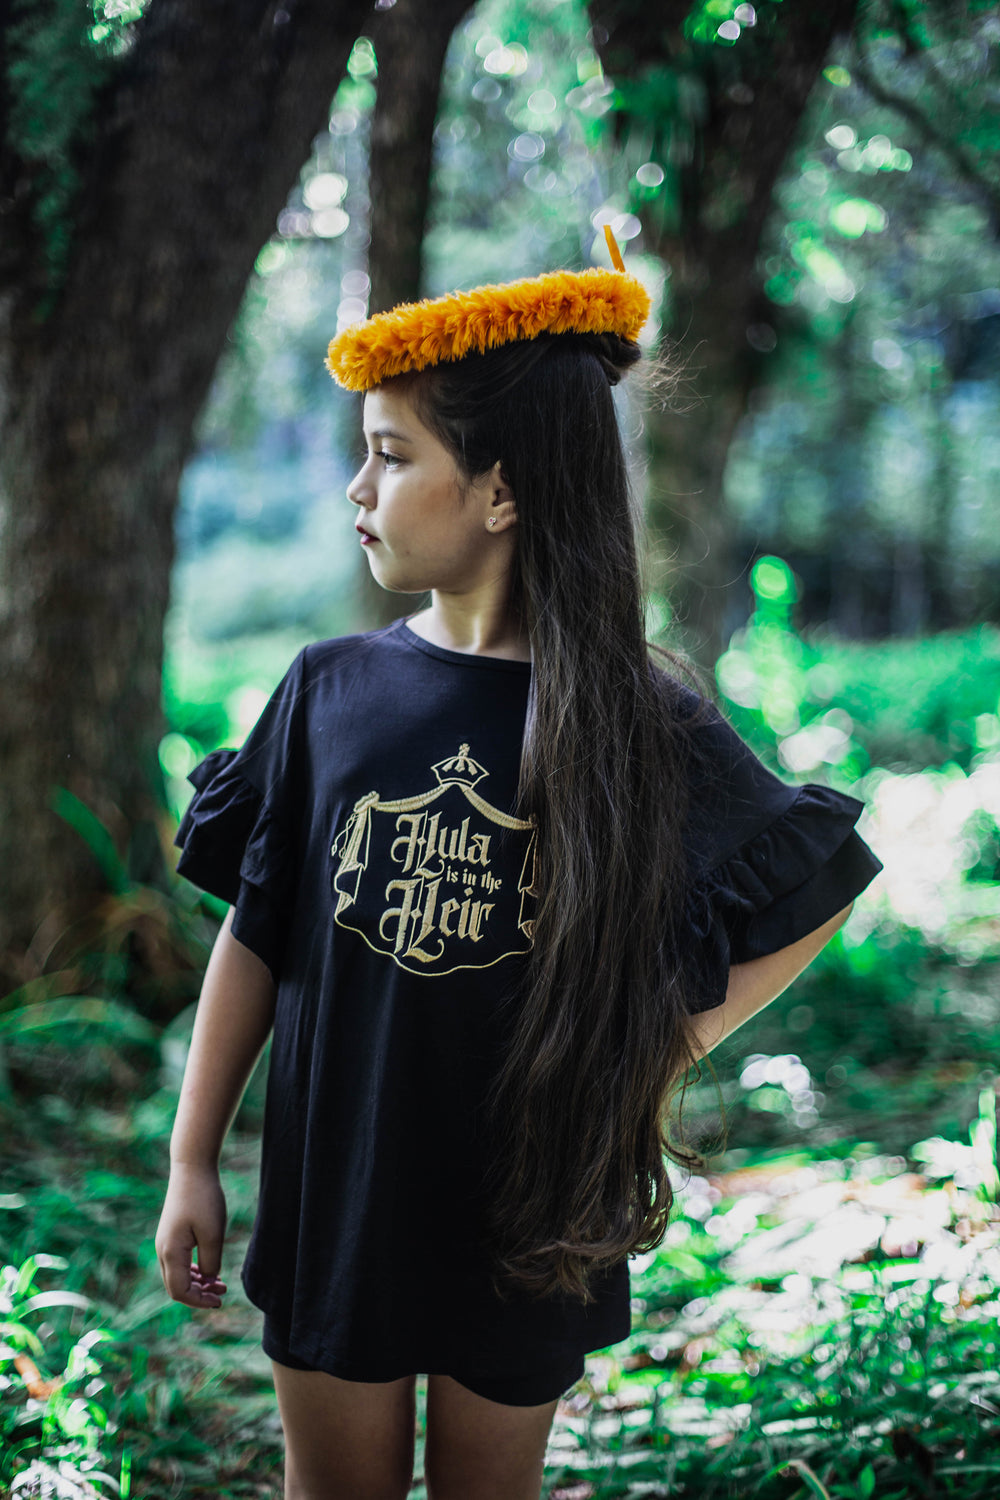 Our flirty, ruffled Līhau Blouse will make your little sweetie feel like the Queen she is! This top features our gold, metallic "Hula is in the Heir" code of arms design embroidered on the chest and made in a soft, viscose spandex.  